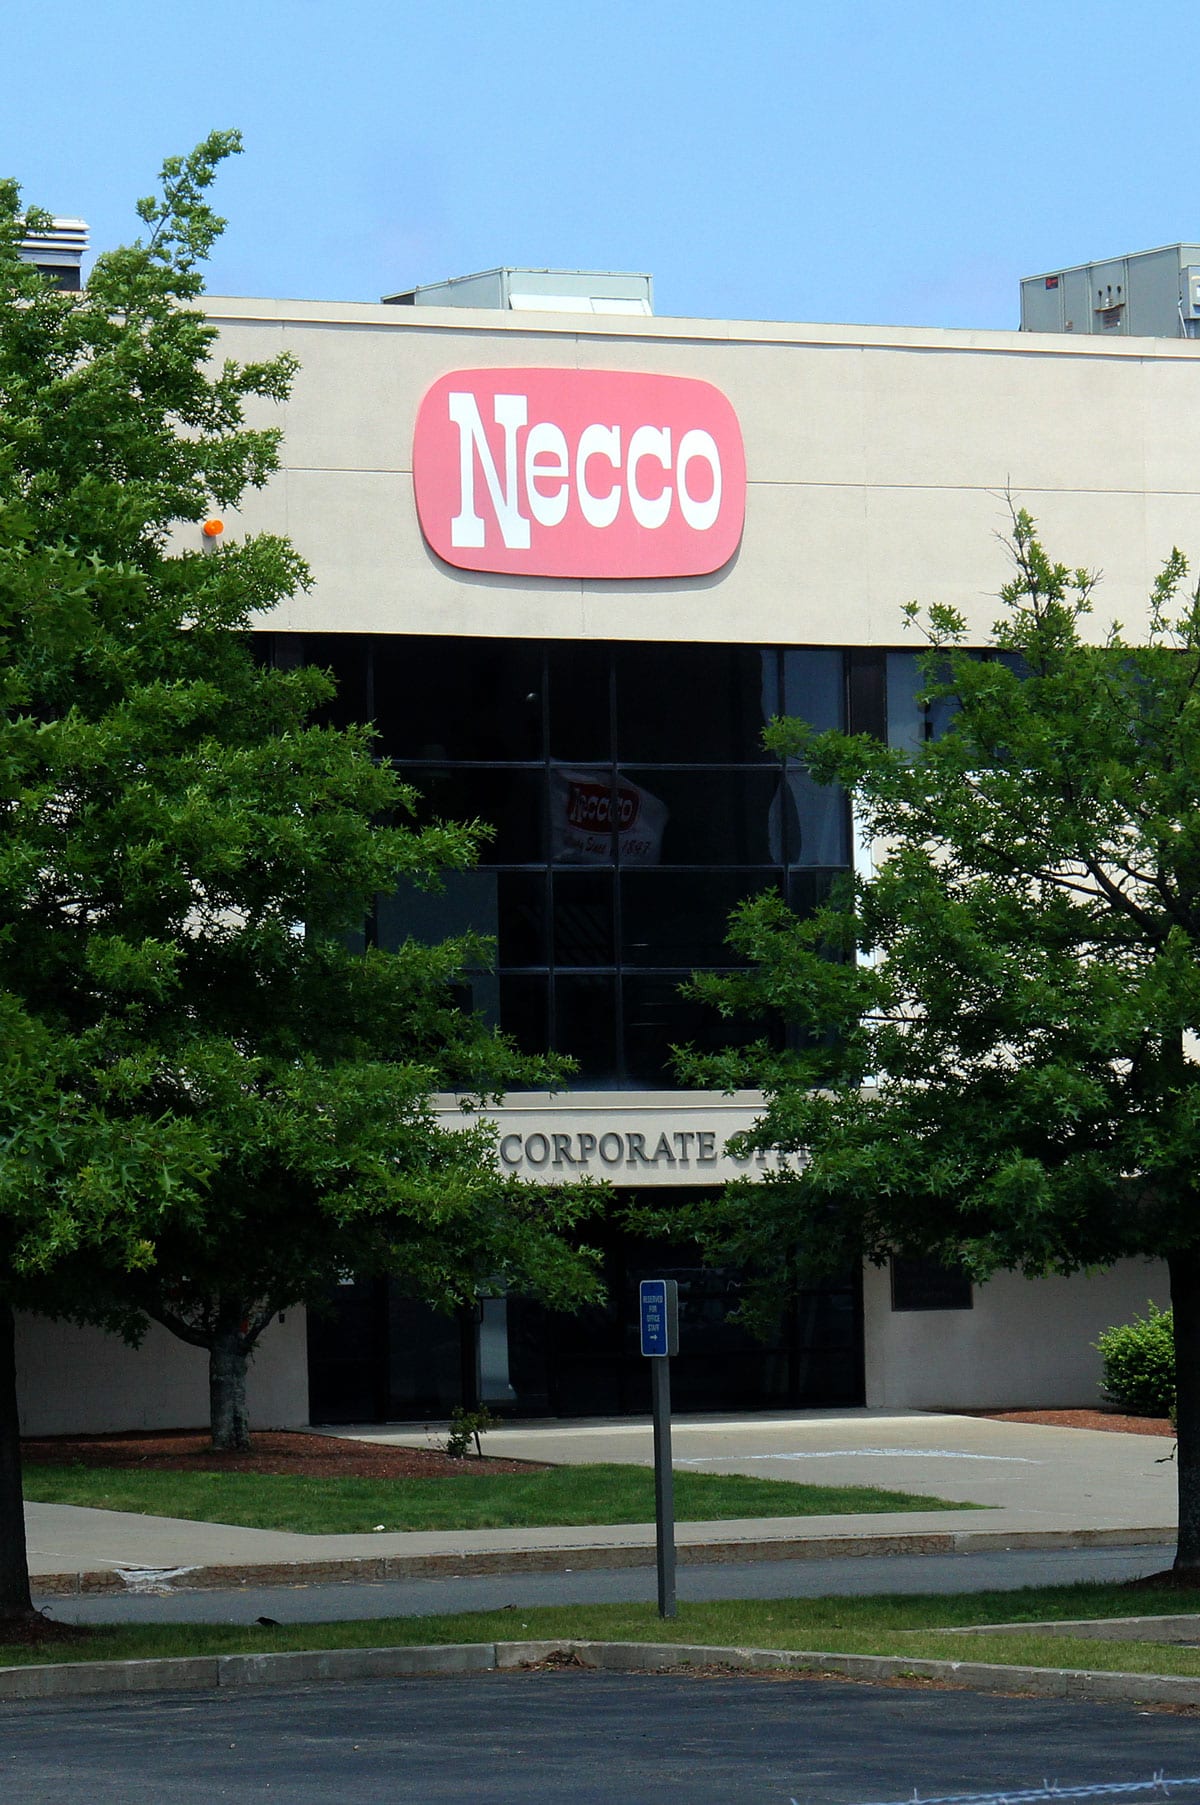 The Necco Candy Factory on American Legion Highway in Revere.